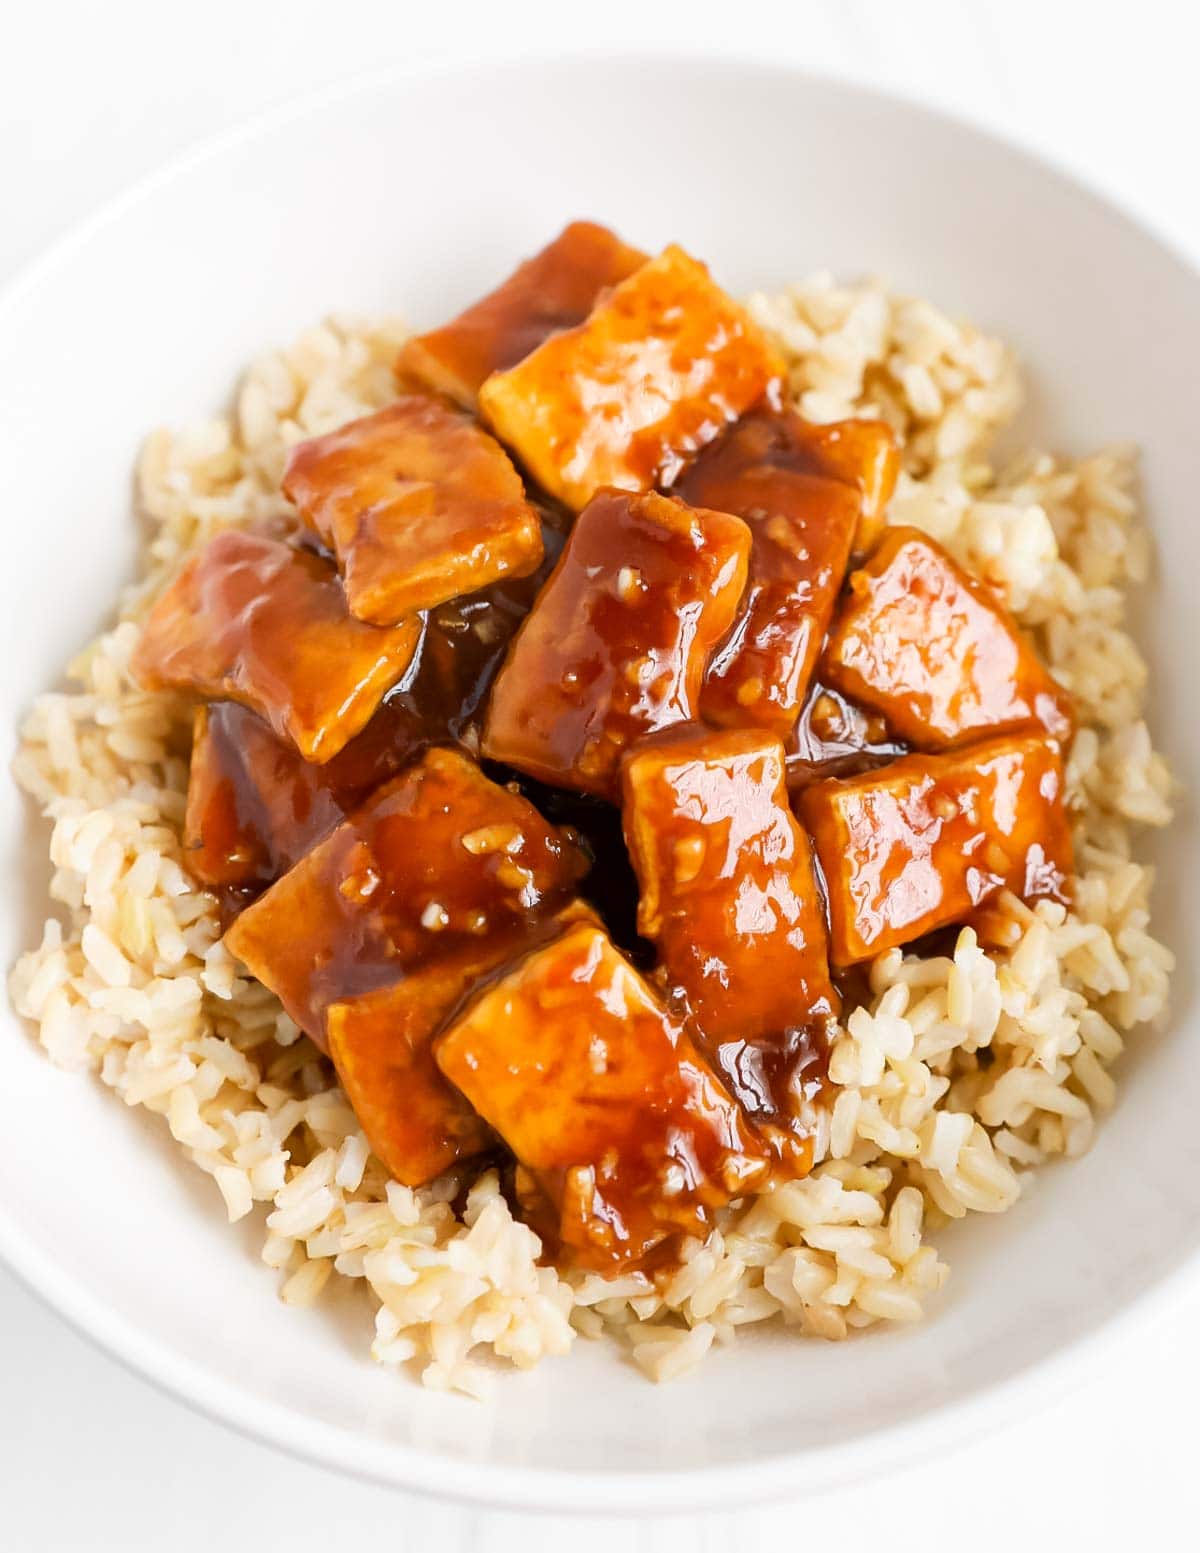 Cooked tofu over a bed of rice. The tofu is covered in a thick brown sesame sauce.